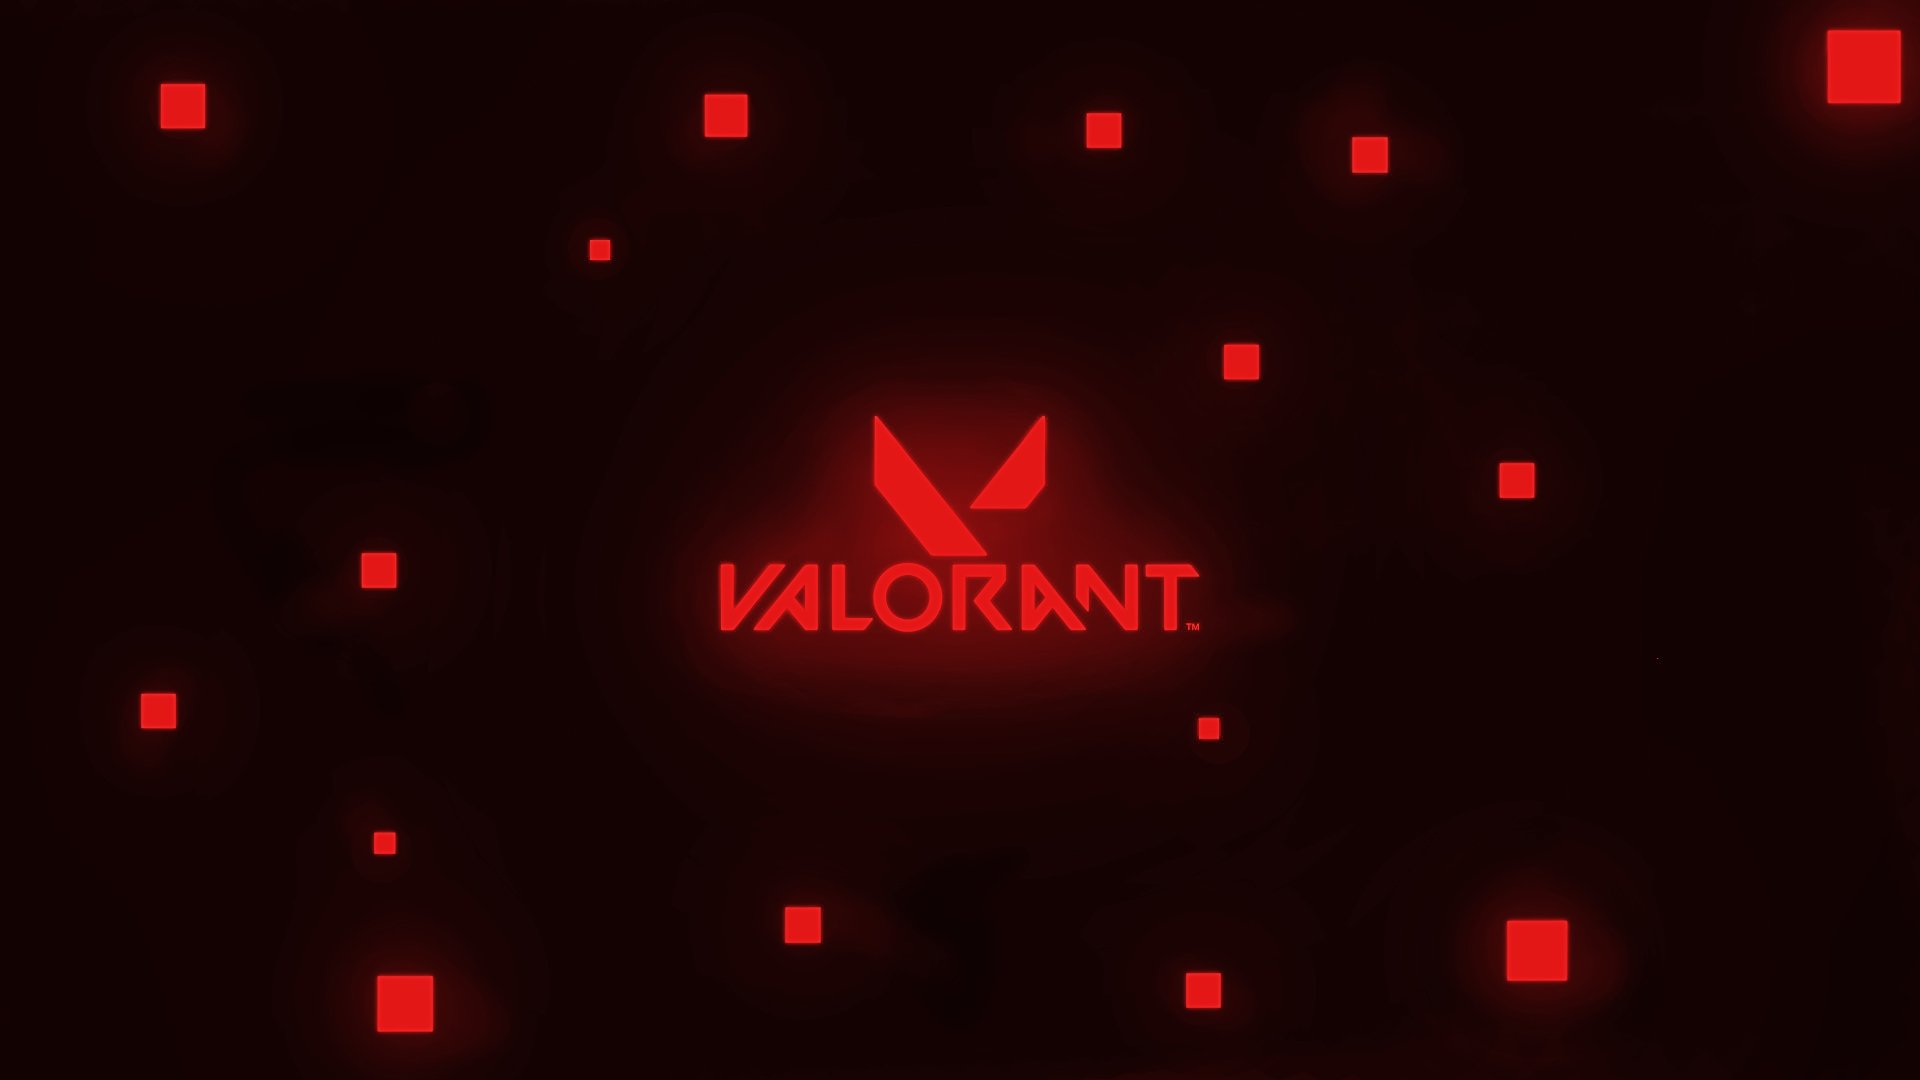 Valorant Background By Embrar - Image Abyss